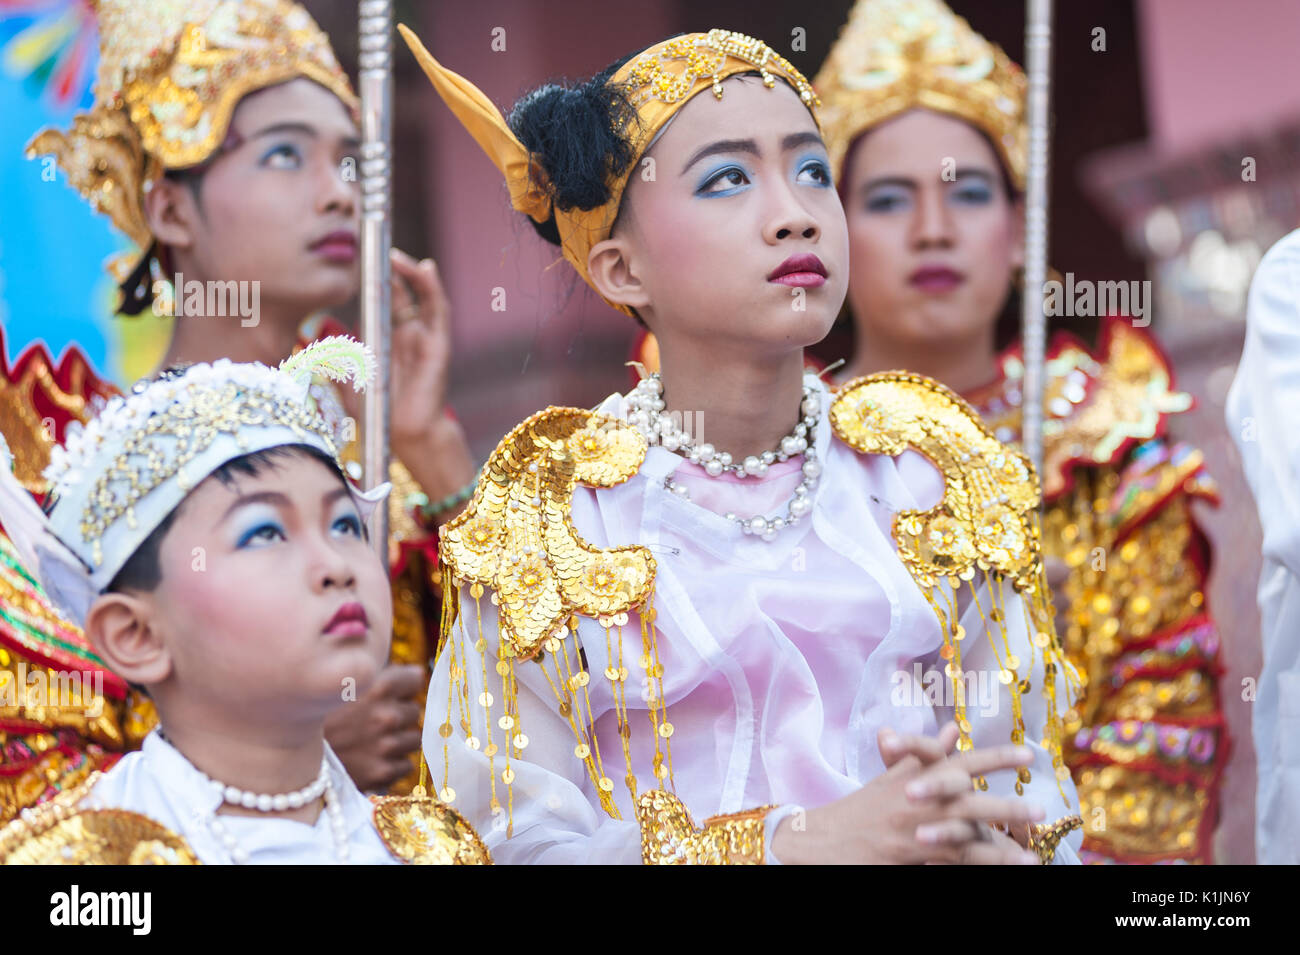 Two young boys dressed in ceremonial prince costumes during religious festivities at Taung Min Gyi Pagoda, Amarapura, Myanmar. Stock Photo